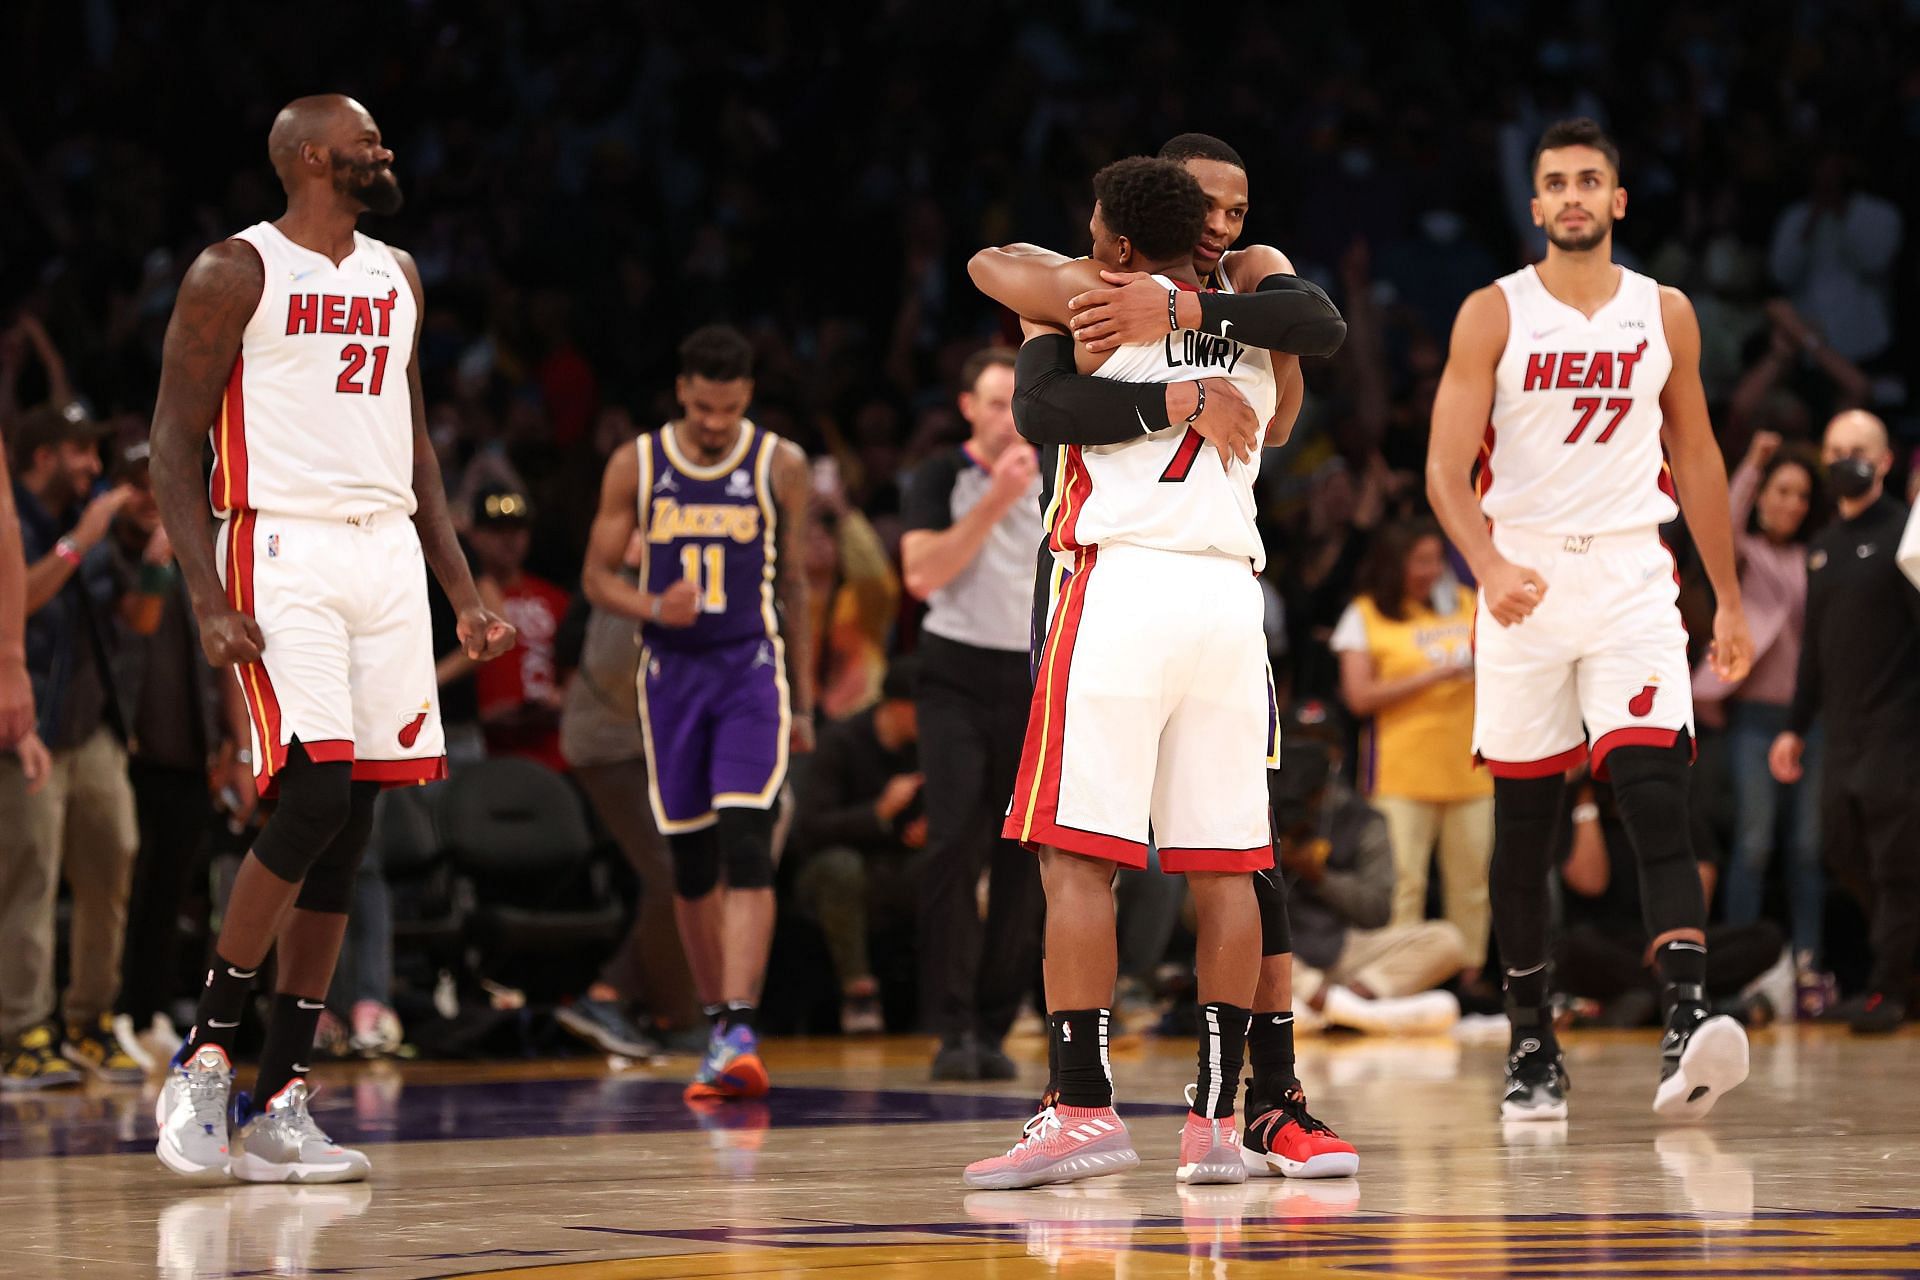 The Miami Heat will lock horns with the Chicago Bulls at the FTX Arena on Saturday night